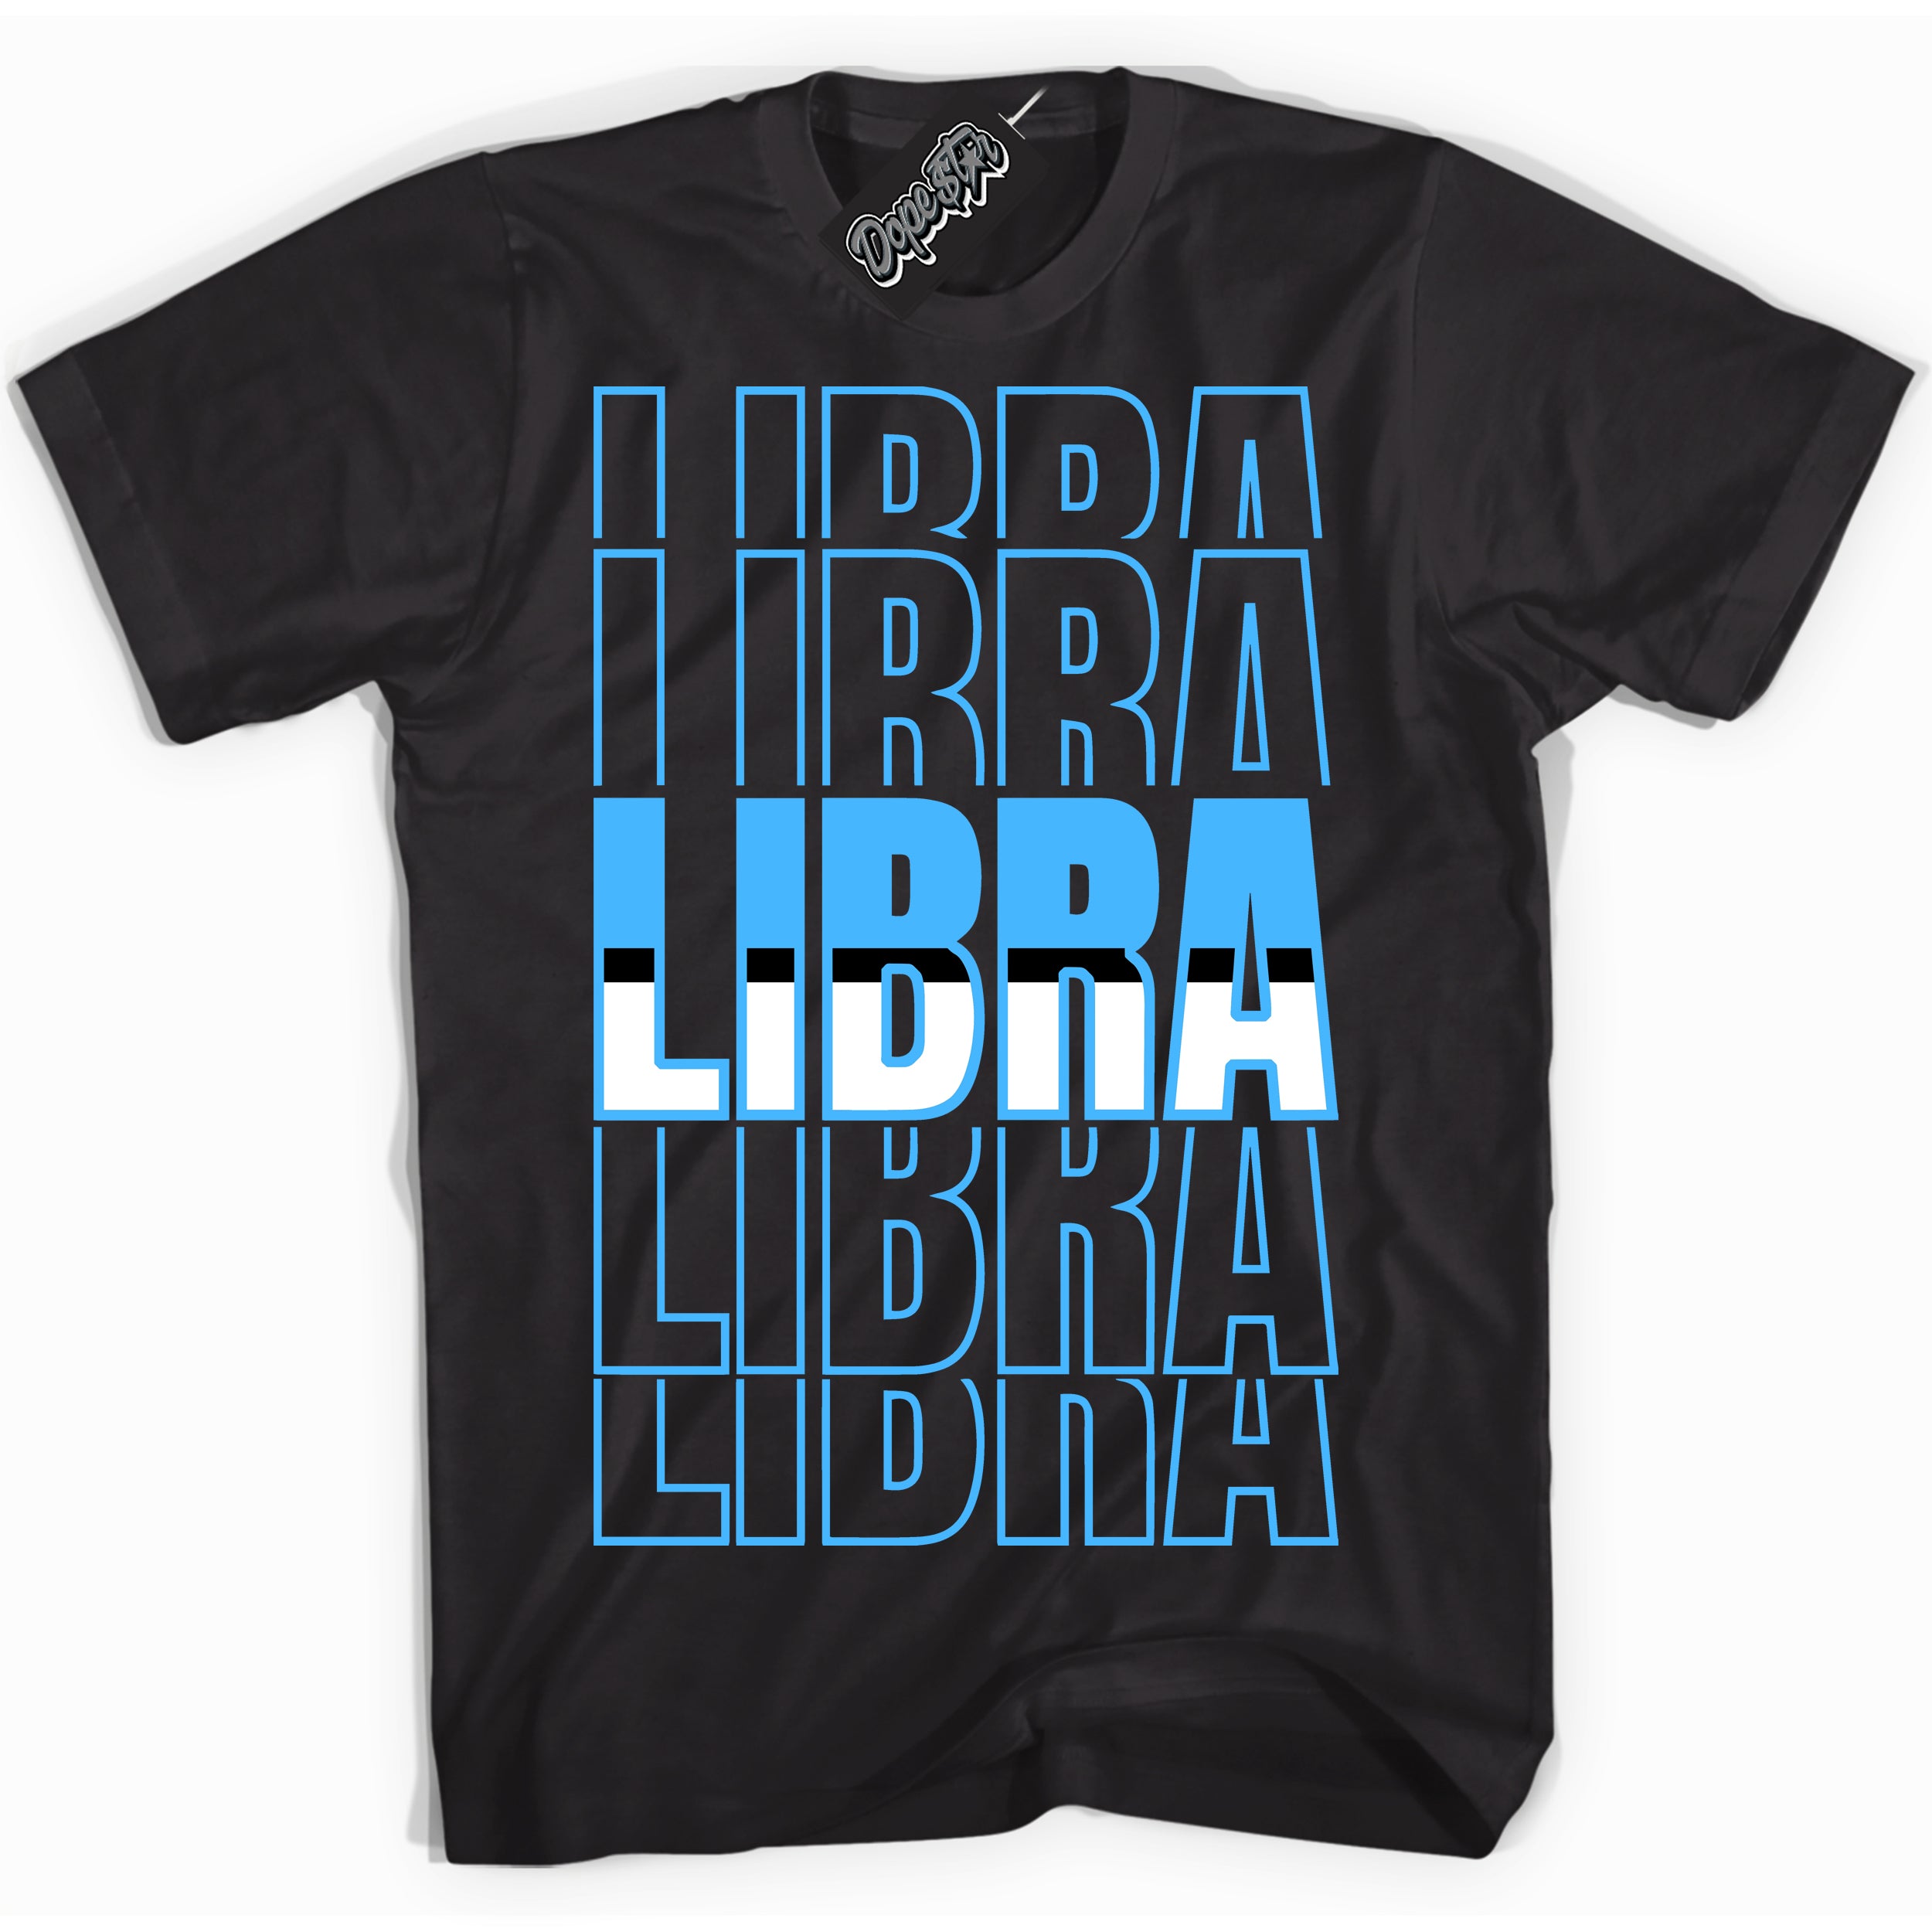 Cool Black graphic tee with “ Libra ” design, that perfectly matches Powder Blue 9s sneakers 